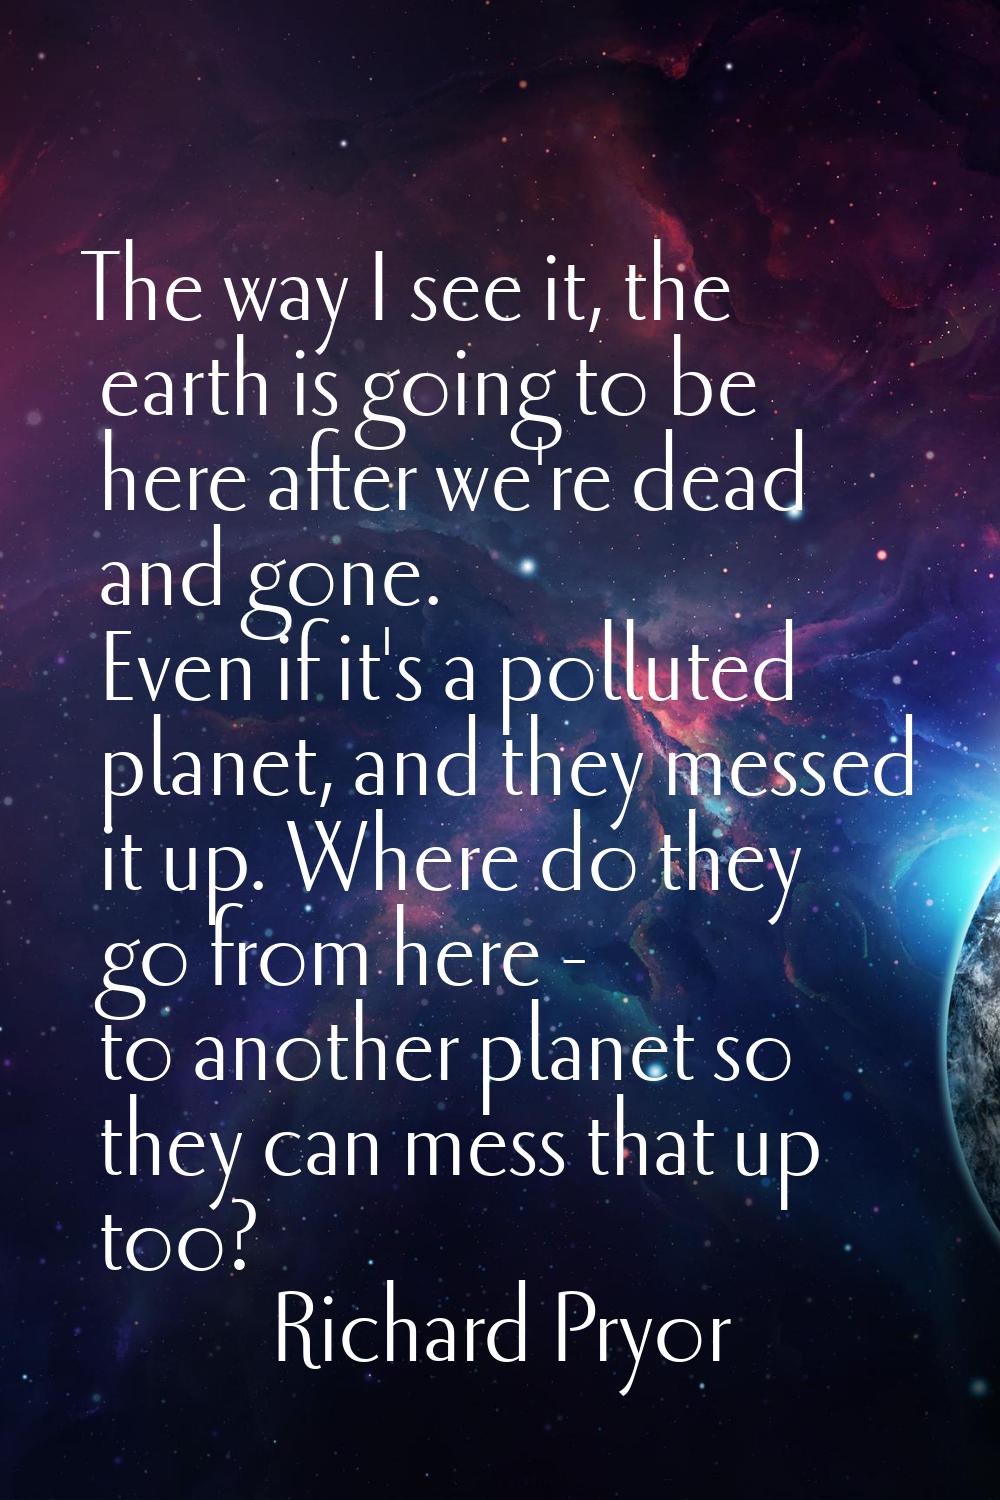 The way I see it, the earth is going to be here after we're dead and gone. Even if it's a polluted 